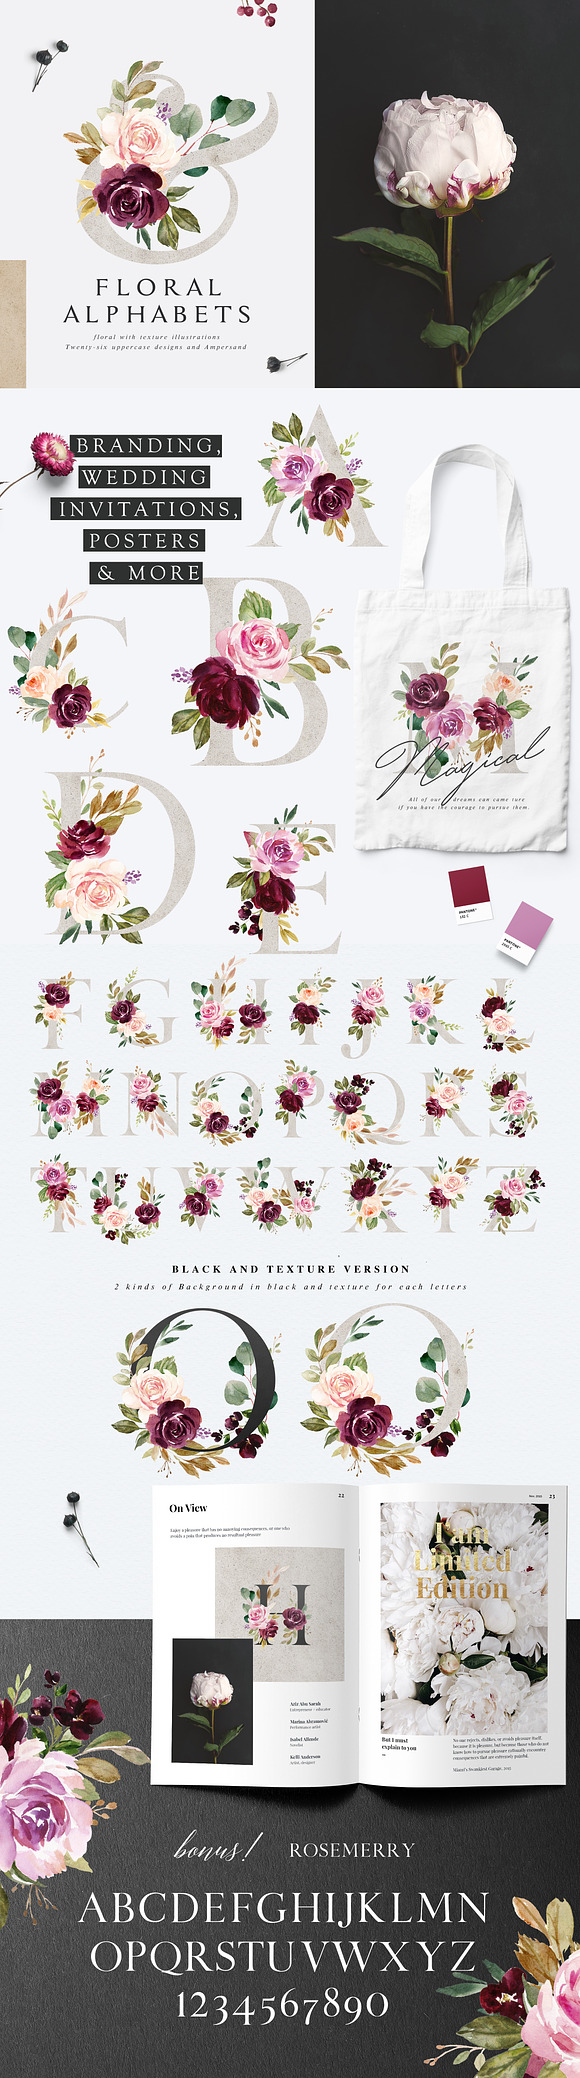 Moody&Rustic-Watercolor Graphic Set in Illustrations - product preview 1